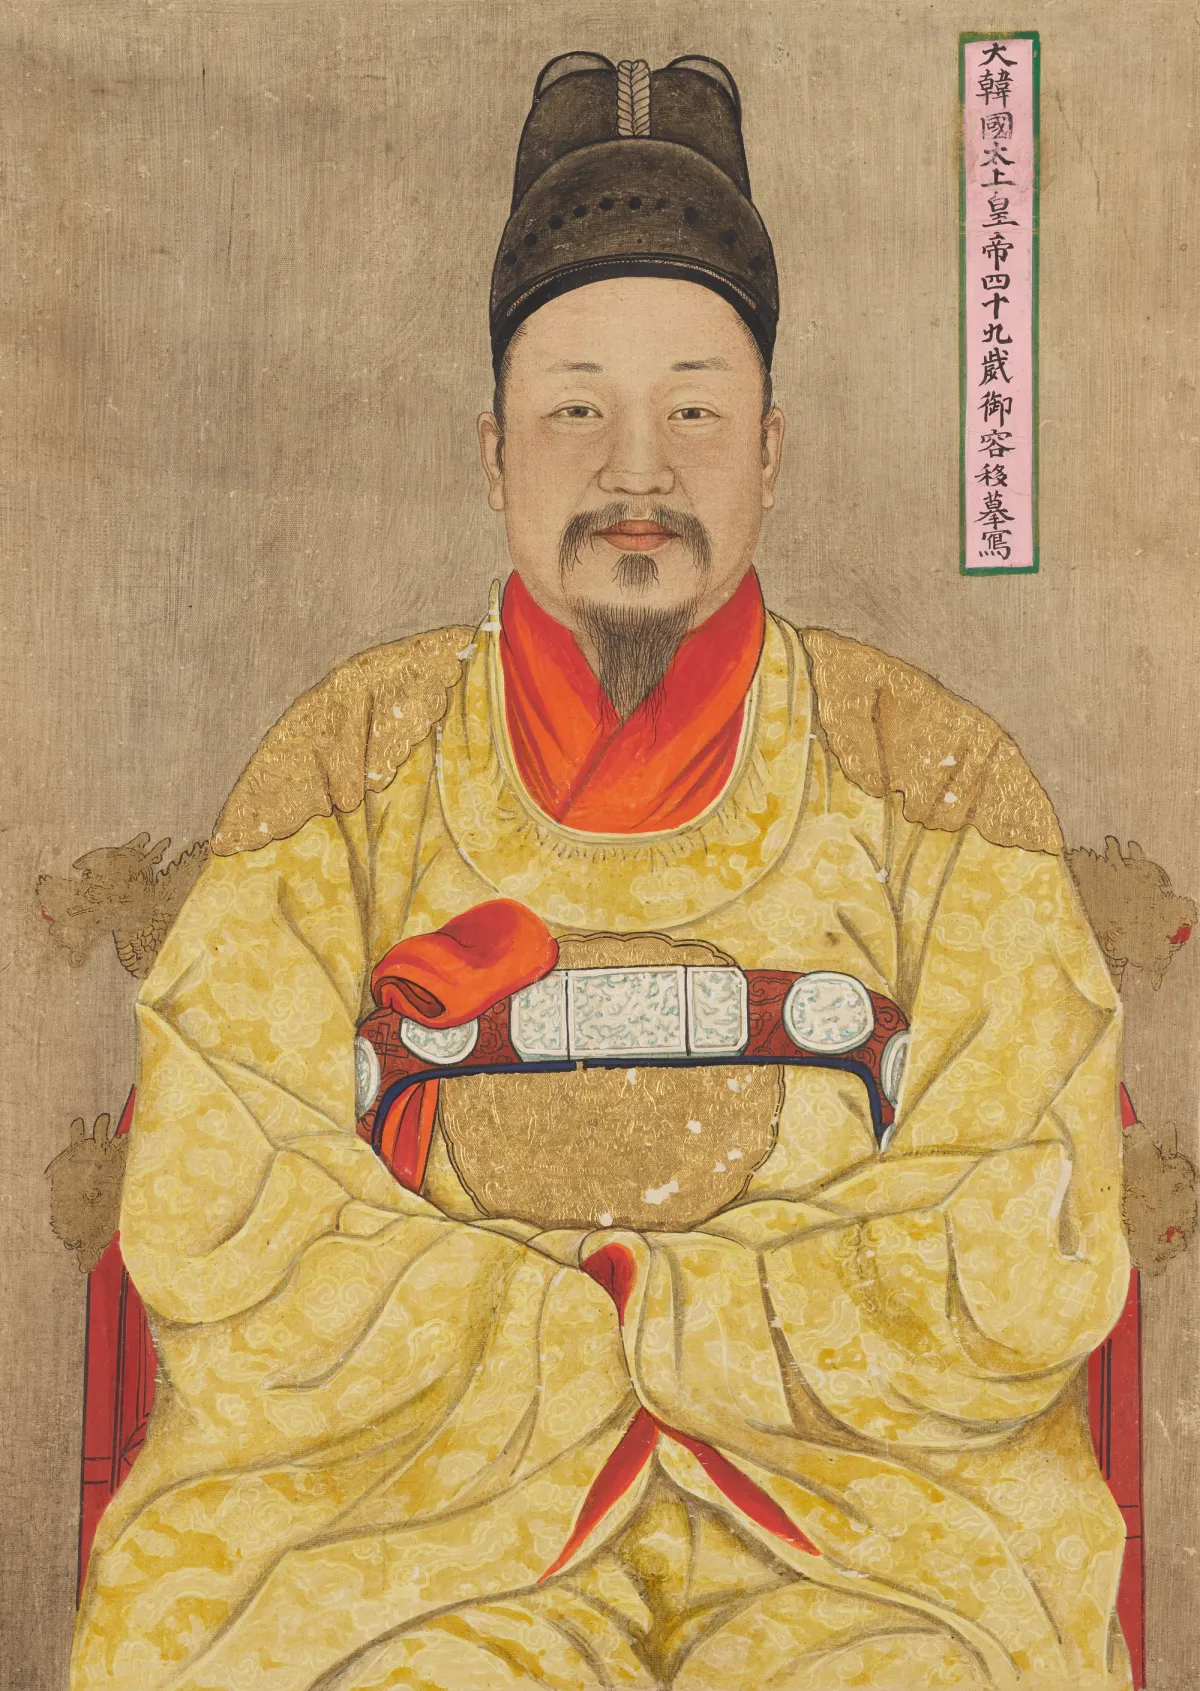 A color on silk portrait from 1920 by Chae Yongsin depicting Emperor Gojong in traditional samurai attire.